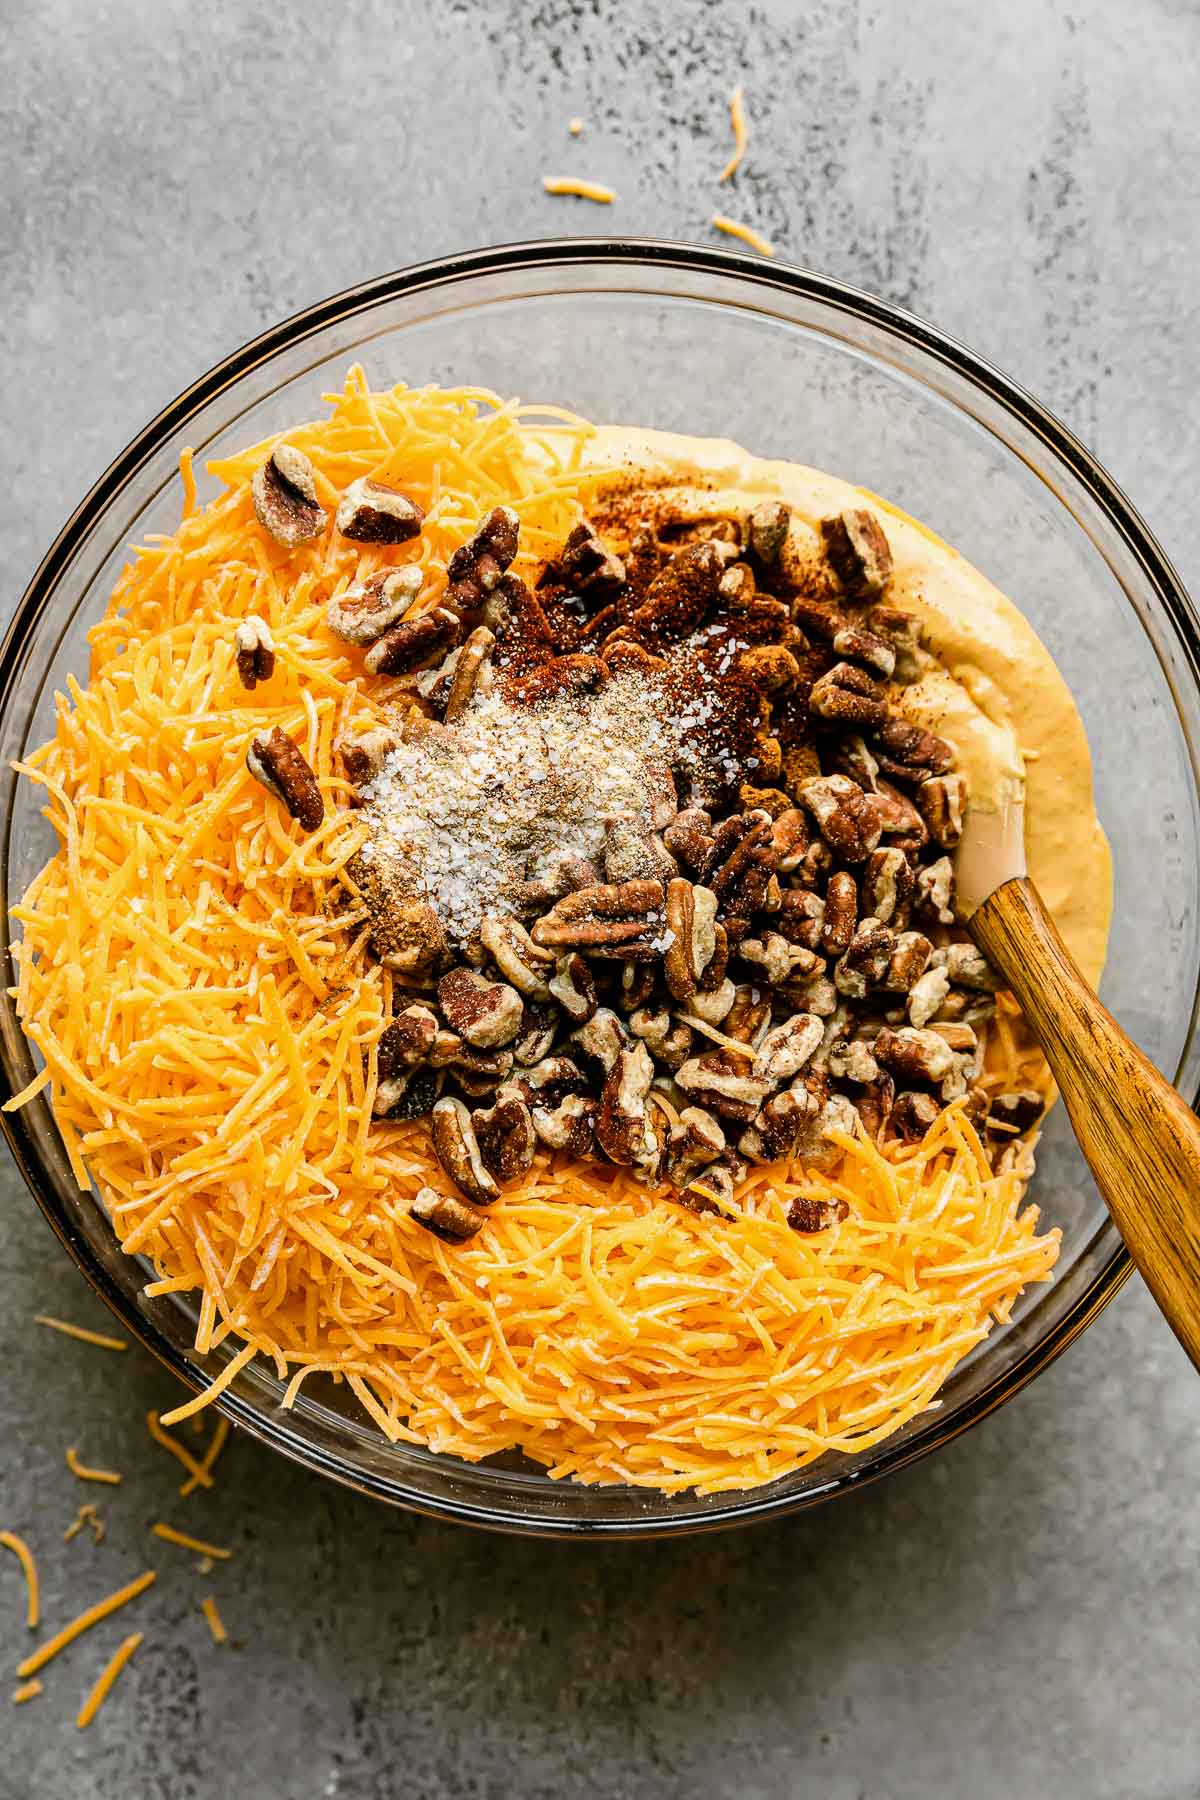 Cream cheese and pumpkin mixture fill a large glass mixing bowl that sits atop a gray textured surface. Shredded cheese, spices, and chopped pecans and walnuts rest atop the cream cheese & pumpkin mixture with a spatula resting inside of the bowl to mix into a pumpkin cheese ball mixture.